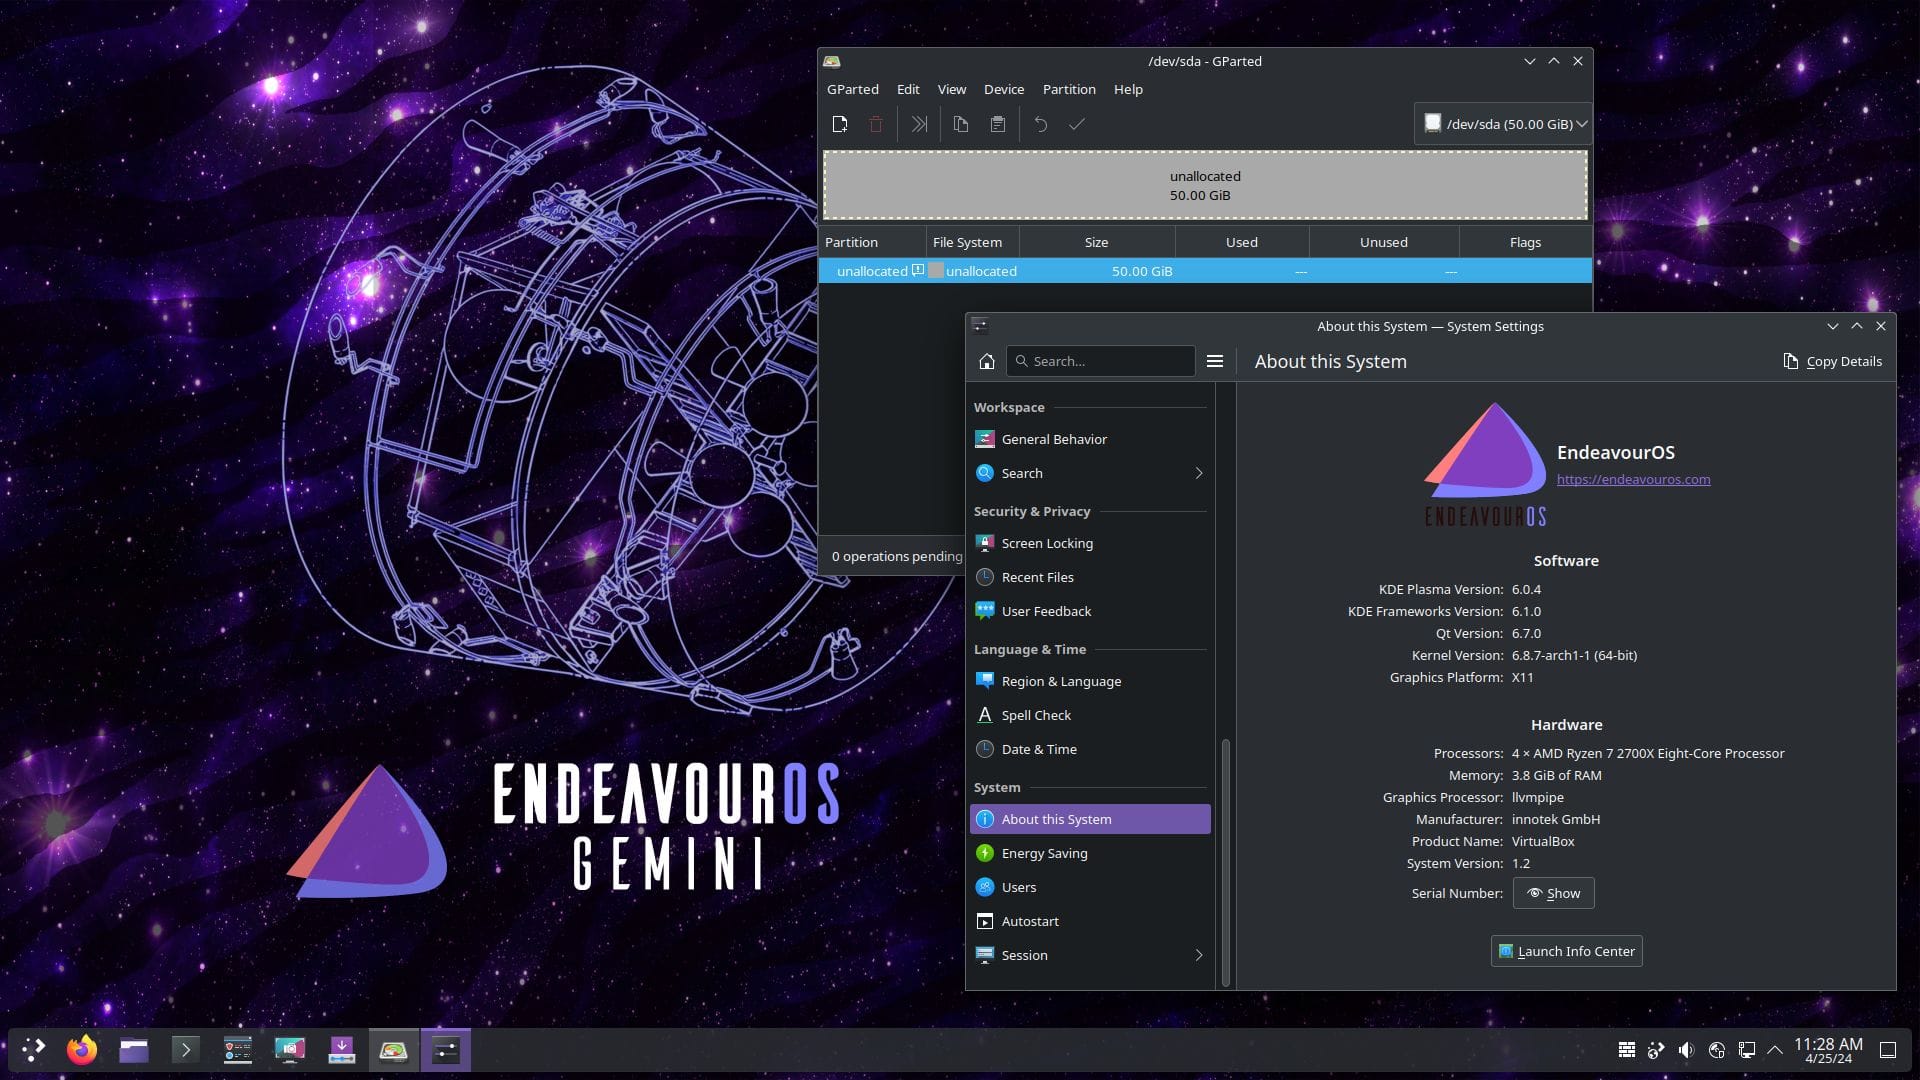 a screenshot of endeavouros gemini desktop with gparted and about this system page open